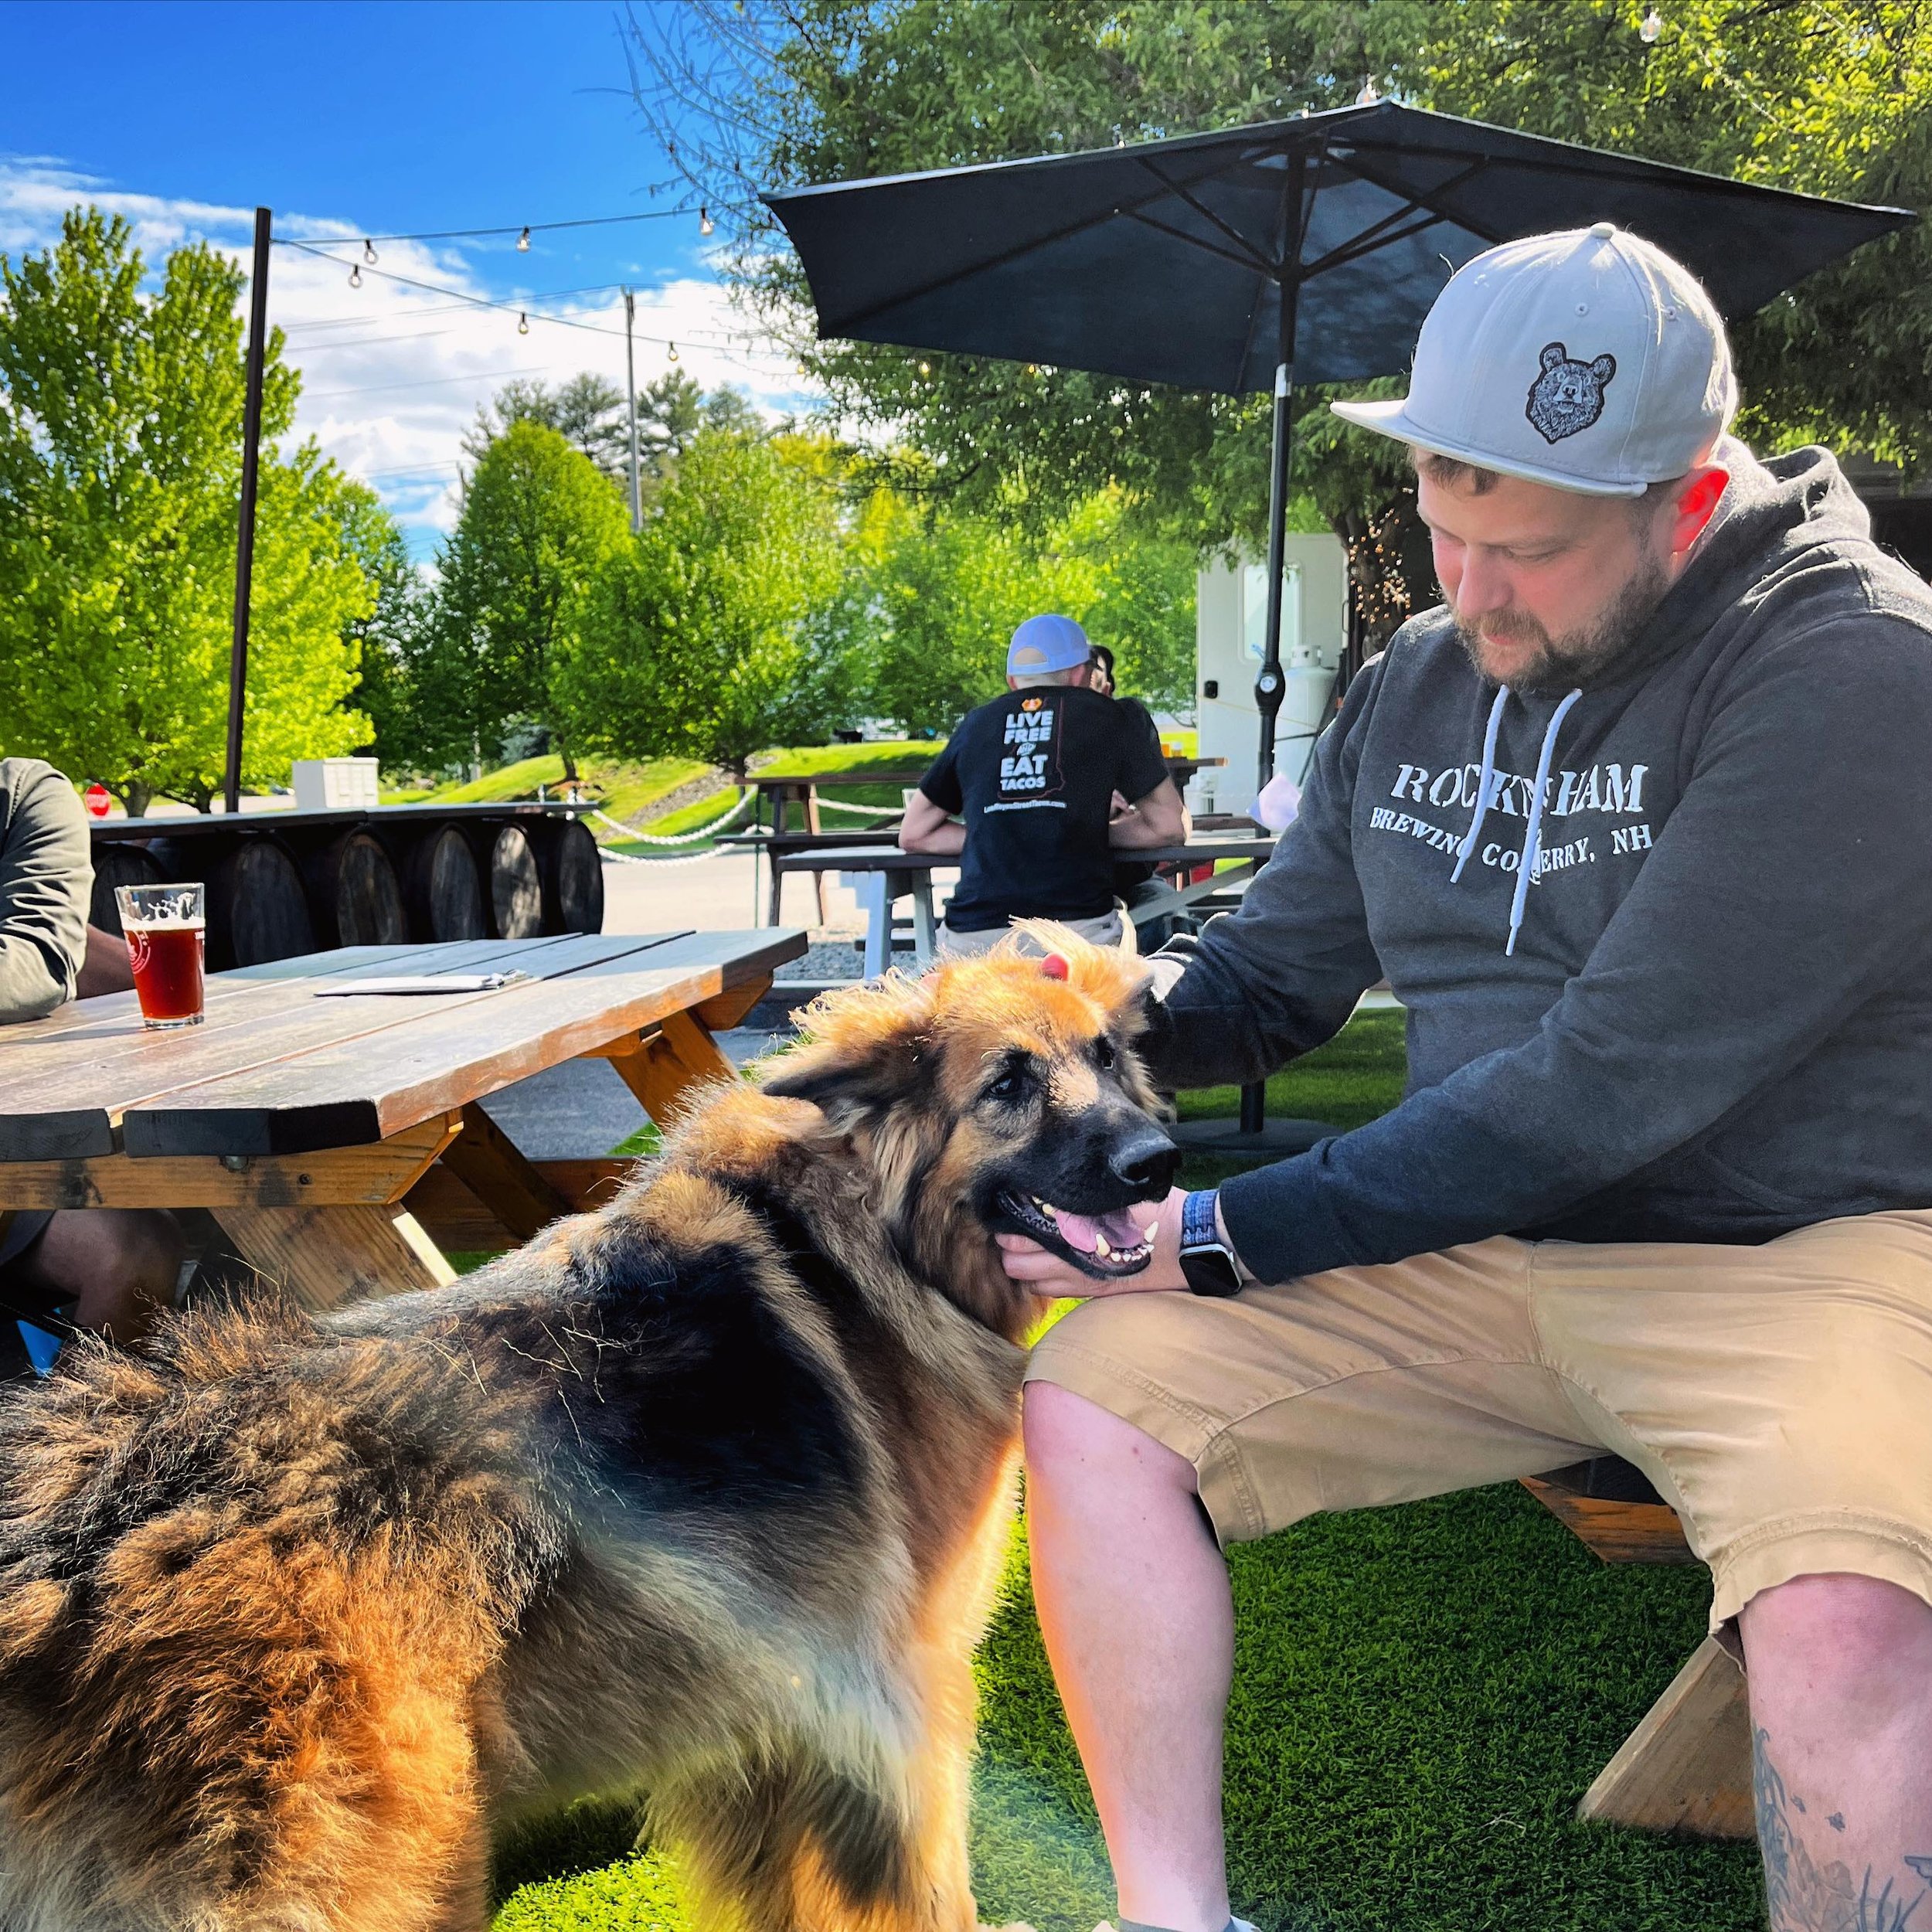 It&rsquo;s a beautiful day on the patio. Grab your best friend &amp; join us!
.
We&rsquo;ve got @analogpizzaco tonight, @walkinggourmetnh Saturday &amp; @iberianempanadas  on Sunday.. And 15 freshies on tap as always!